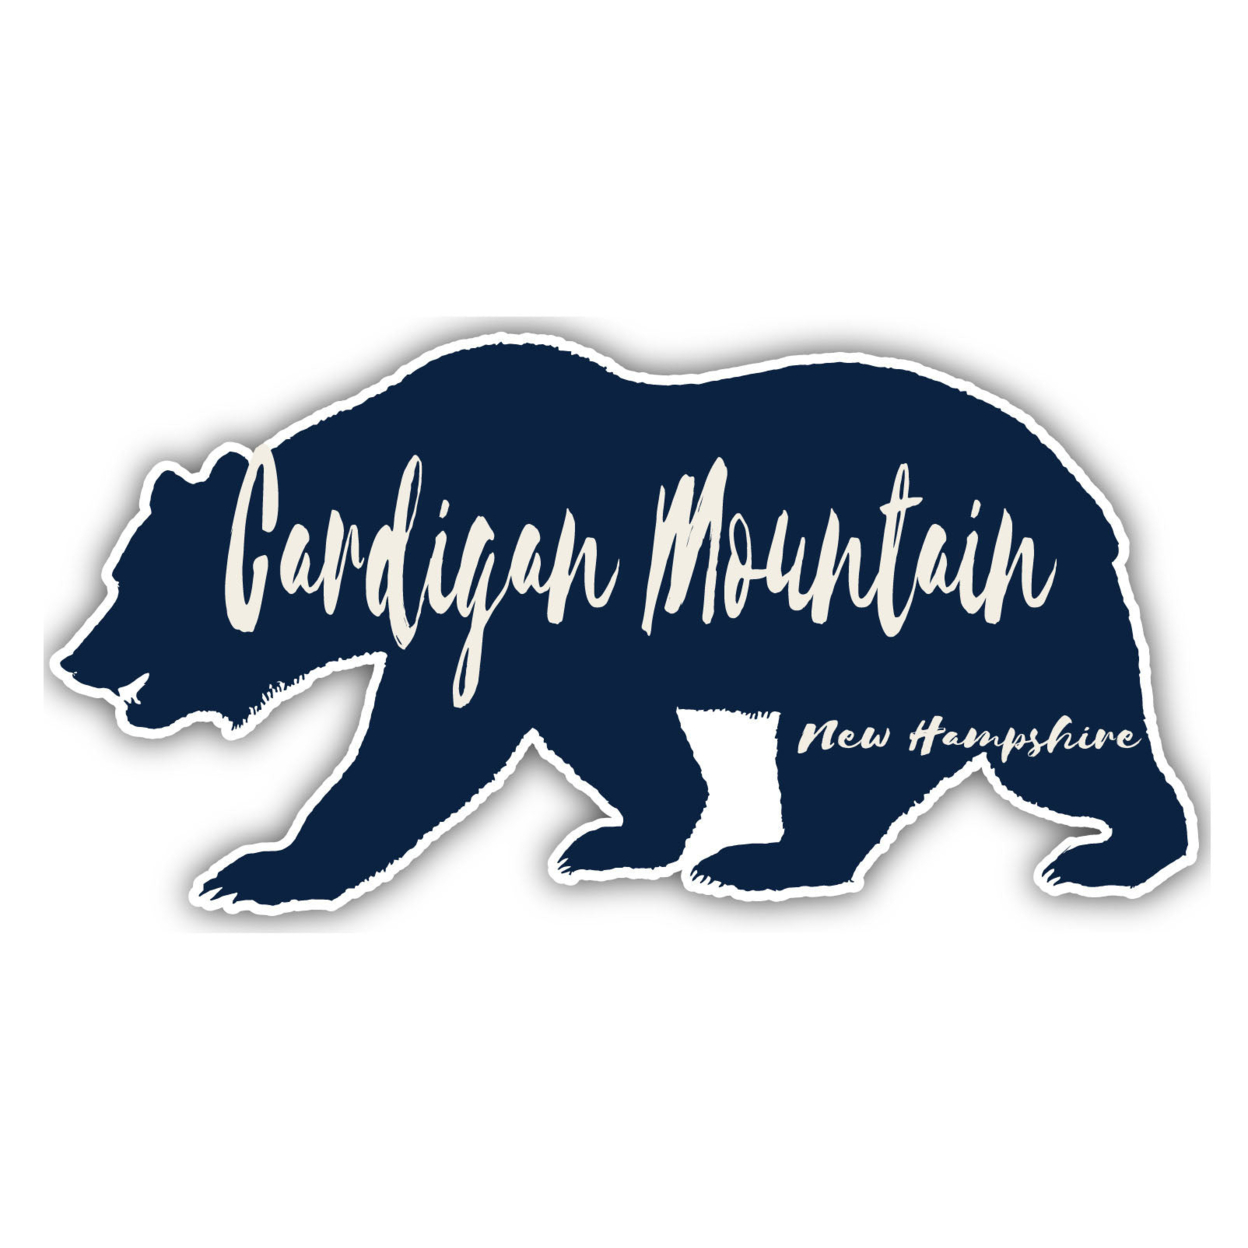 Cardigan Mountain New Hampshire Souvenir Decorative Stickers (Choose Theme And Size) - 4-Pack, 8-Inch, Bear